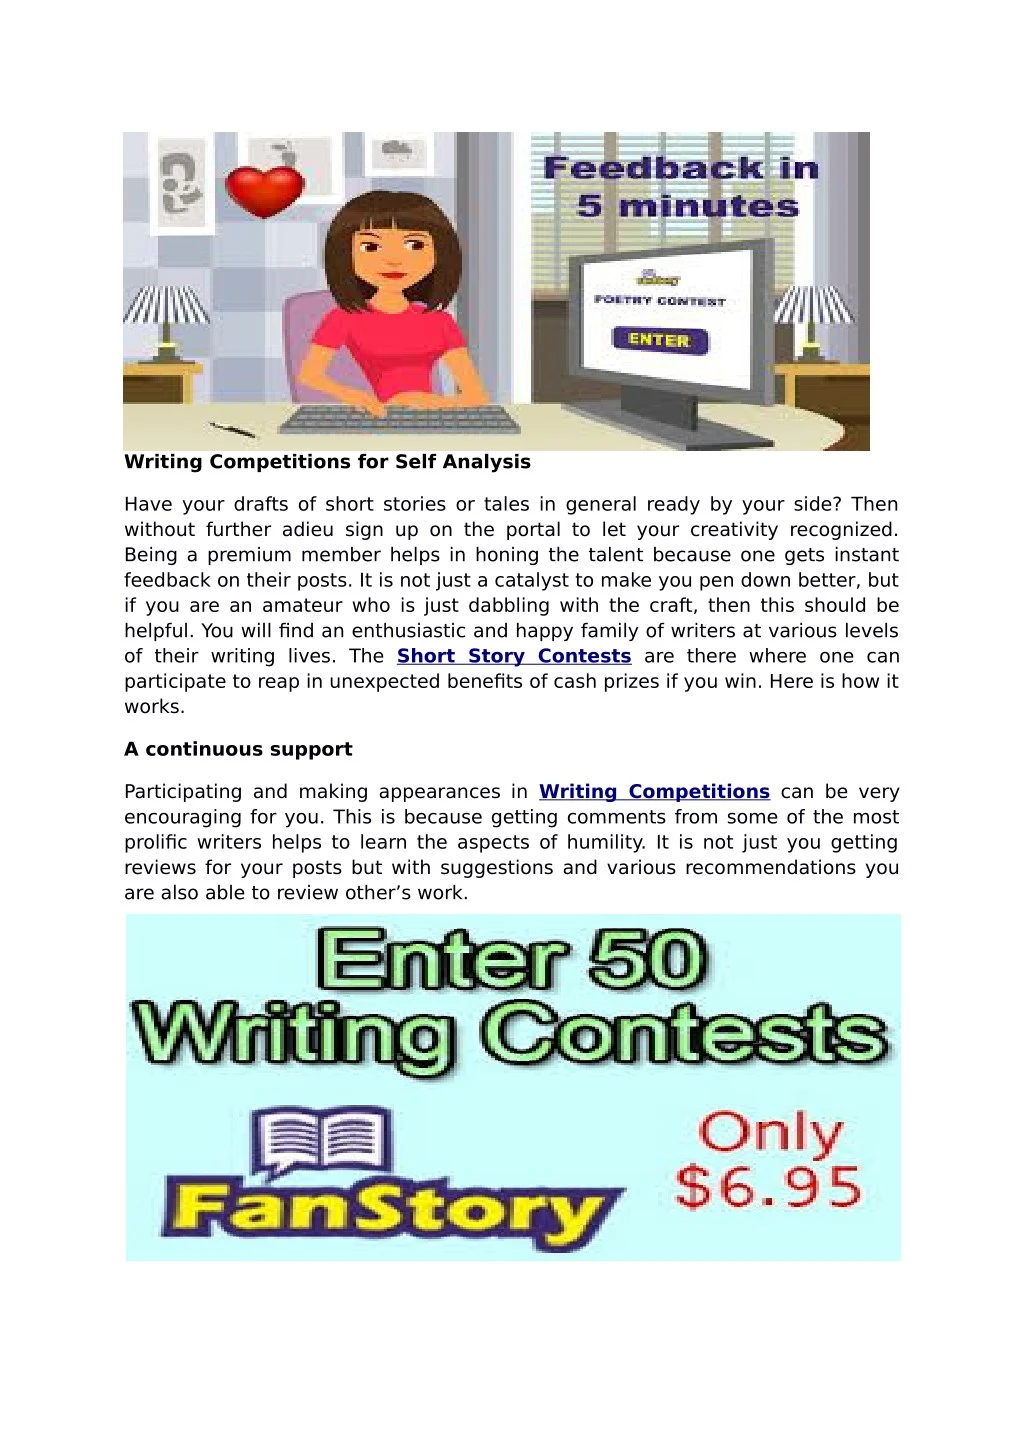 writing competitions for self analysis